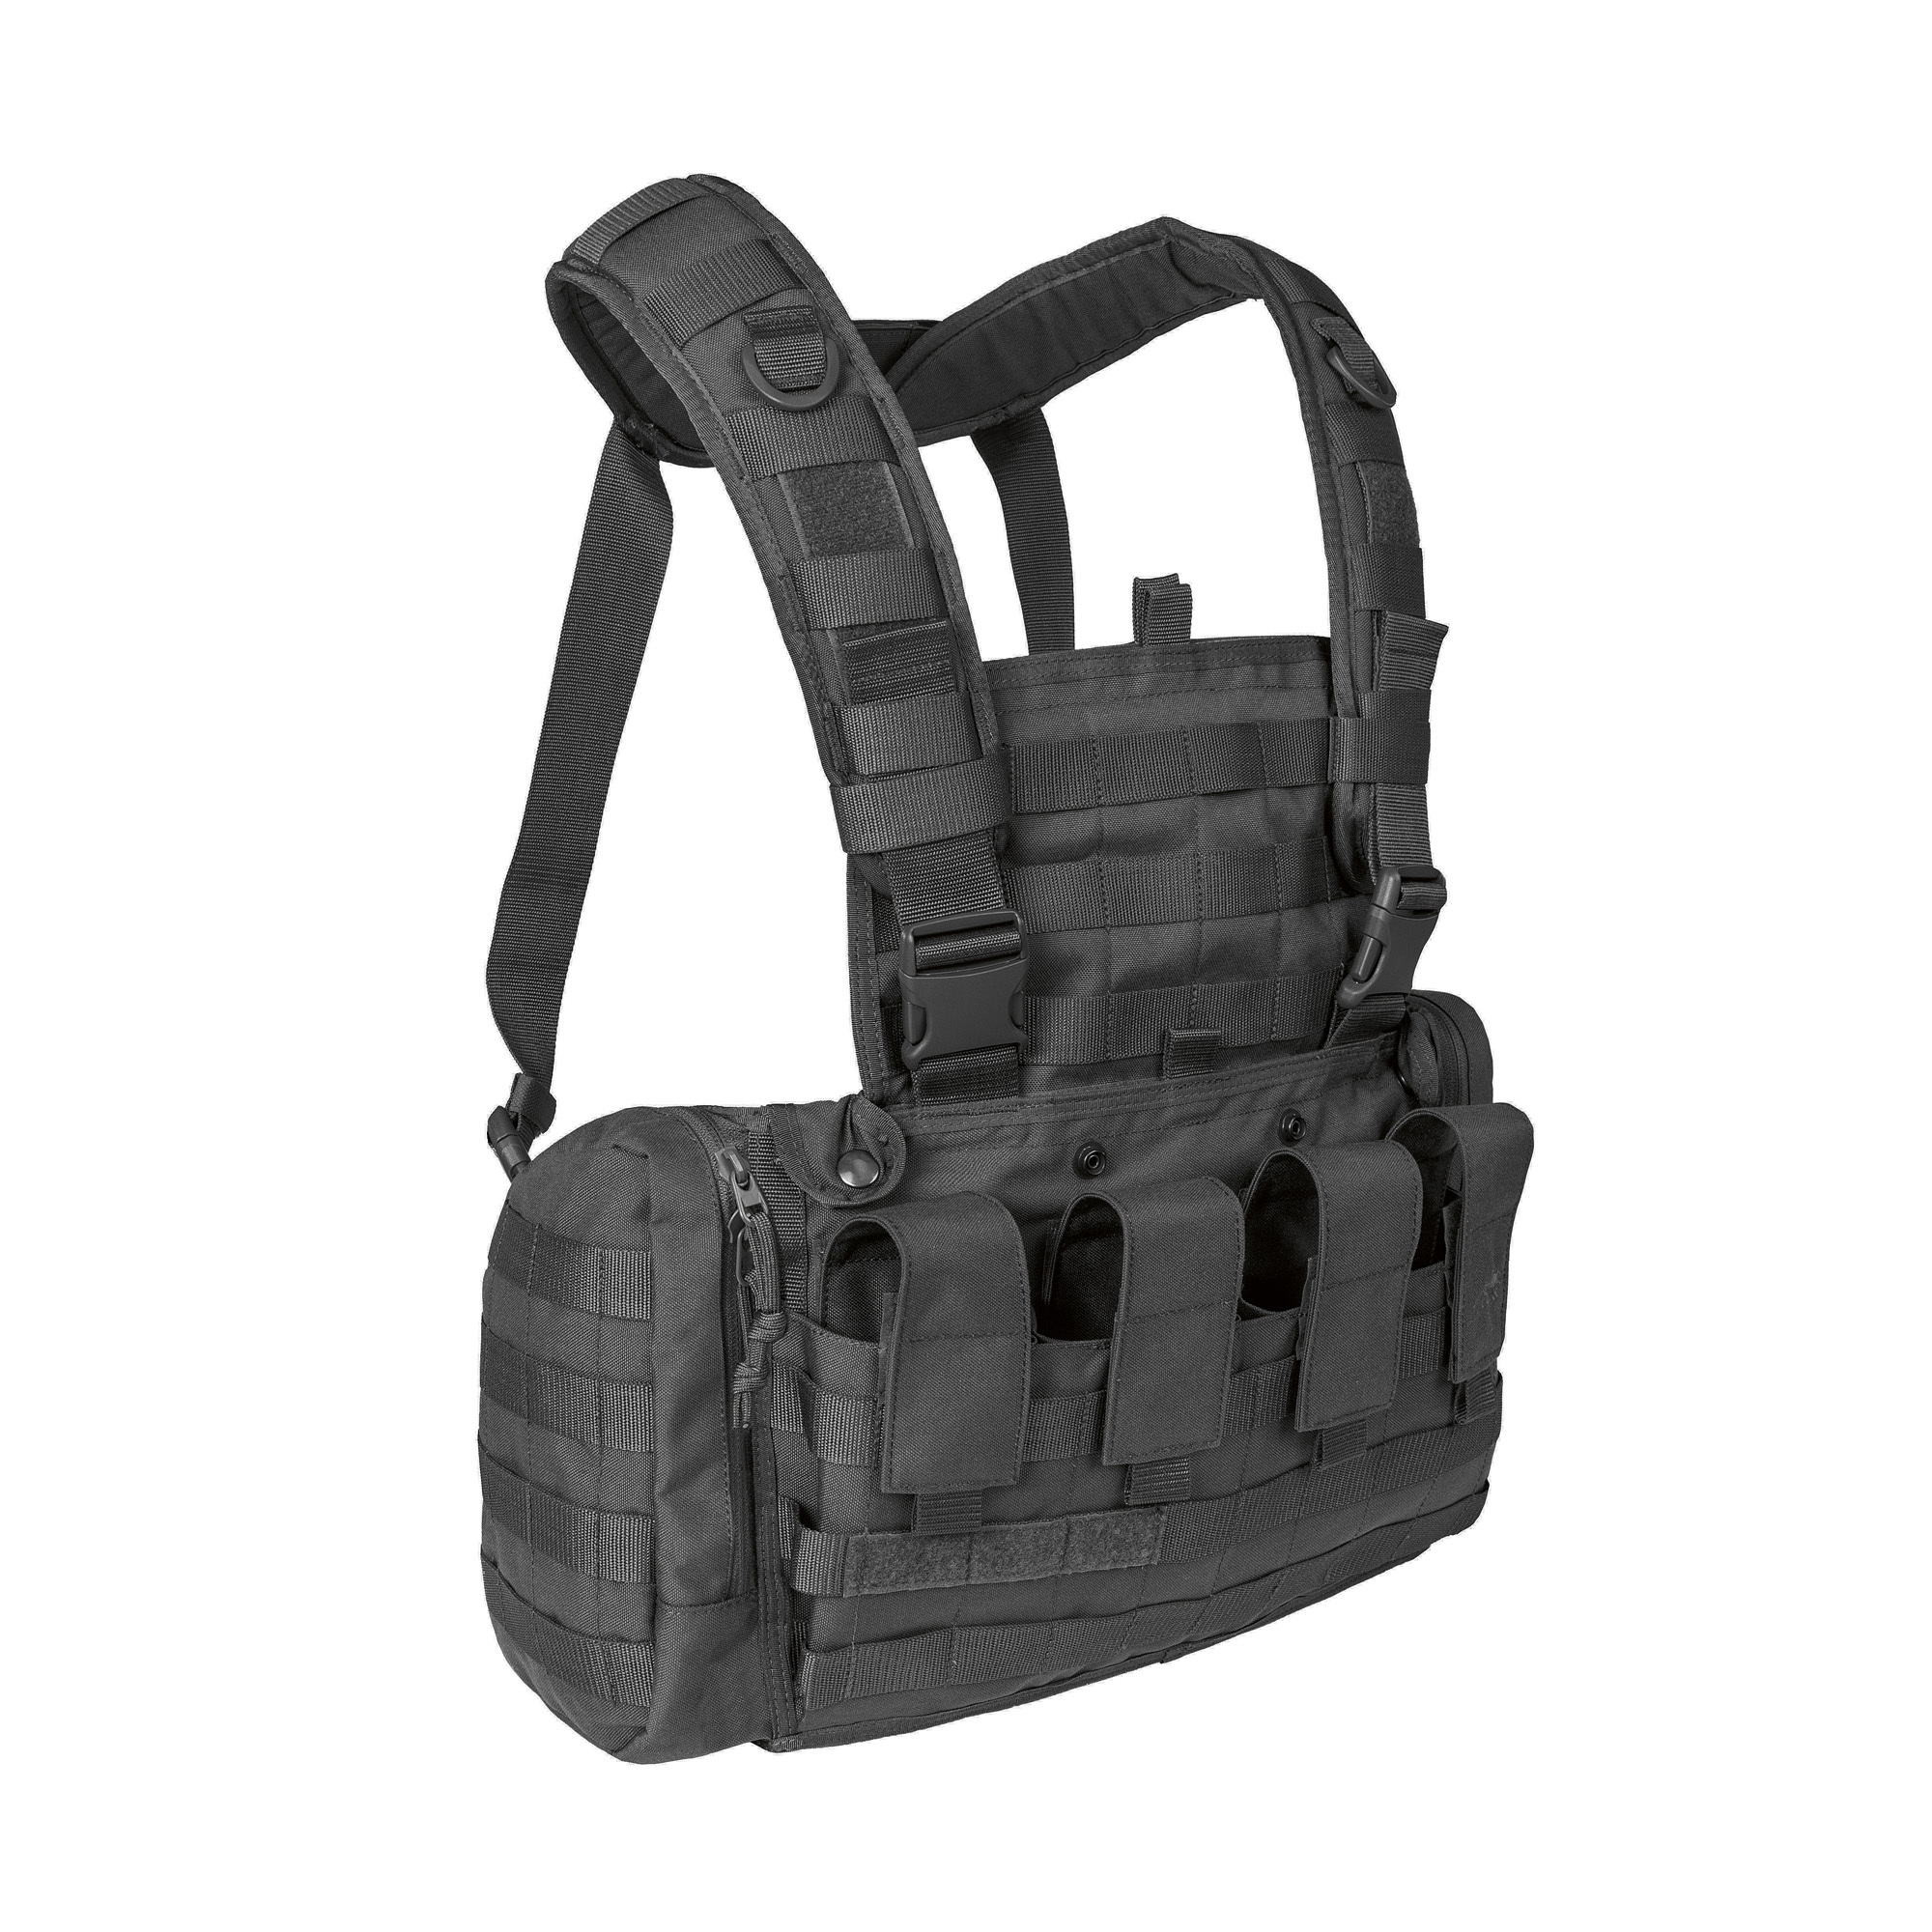 TT Chest Rig MKII - Harness with Side Pockets